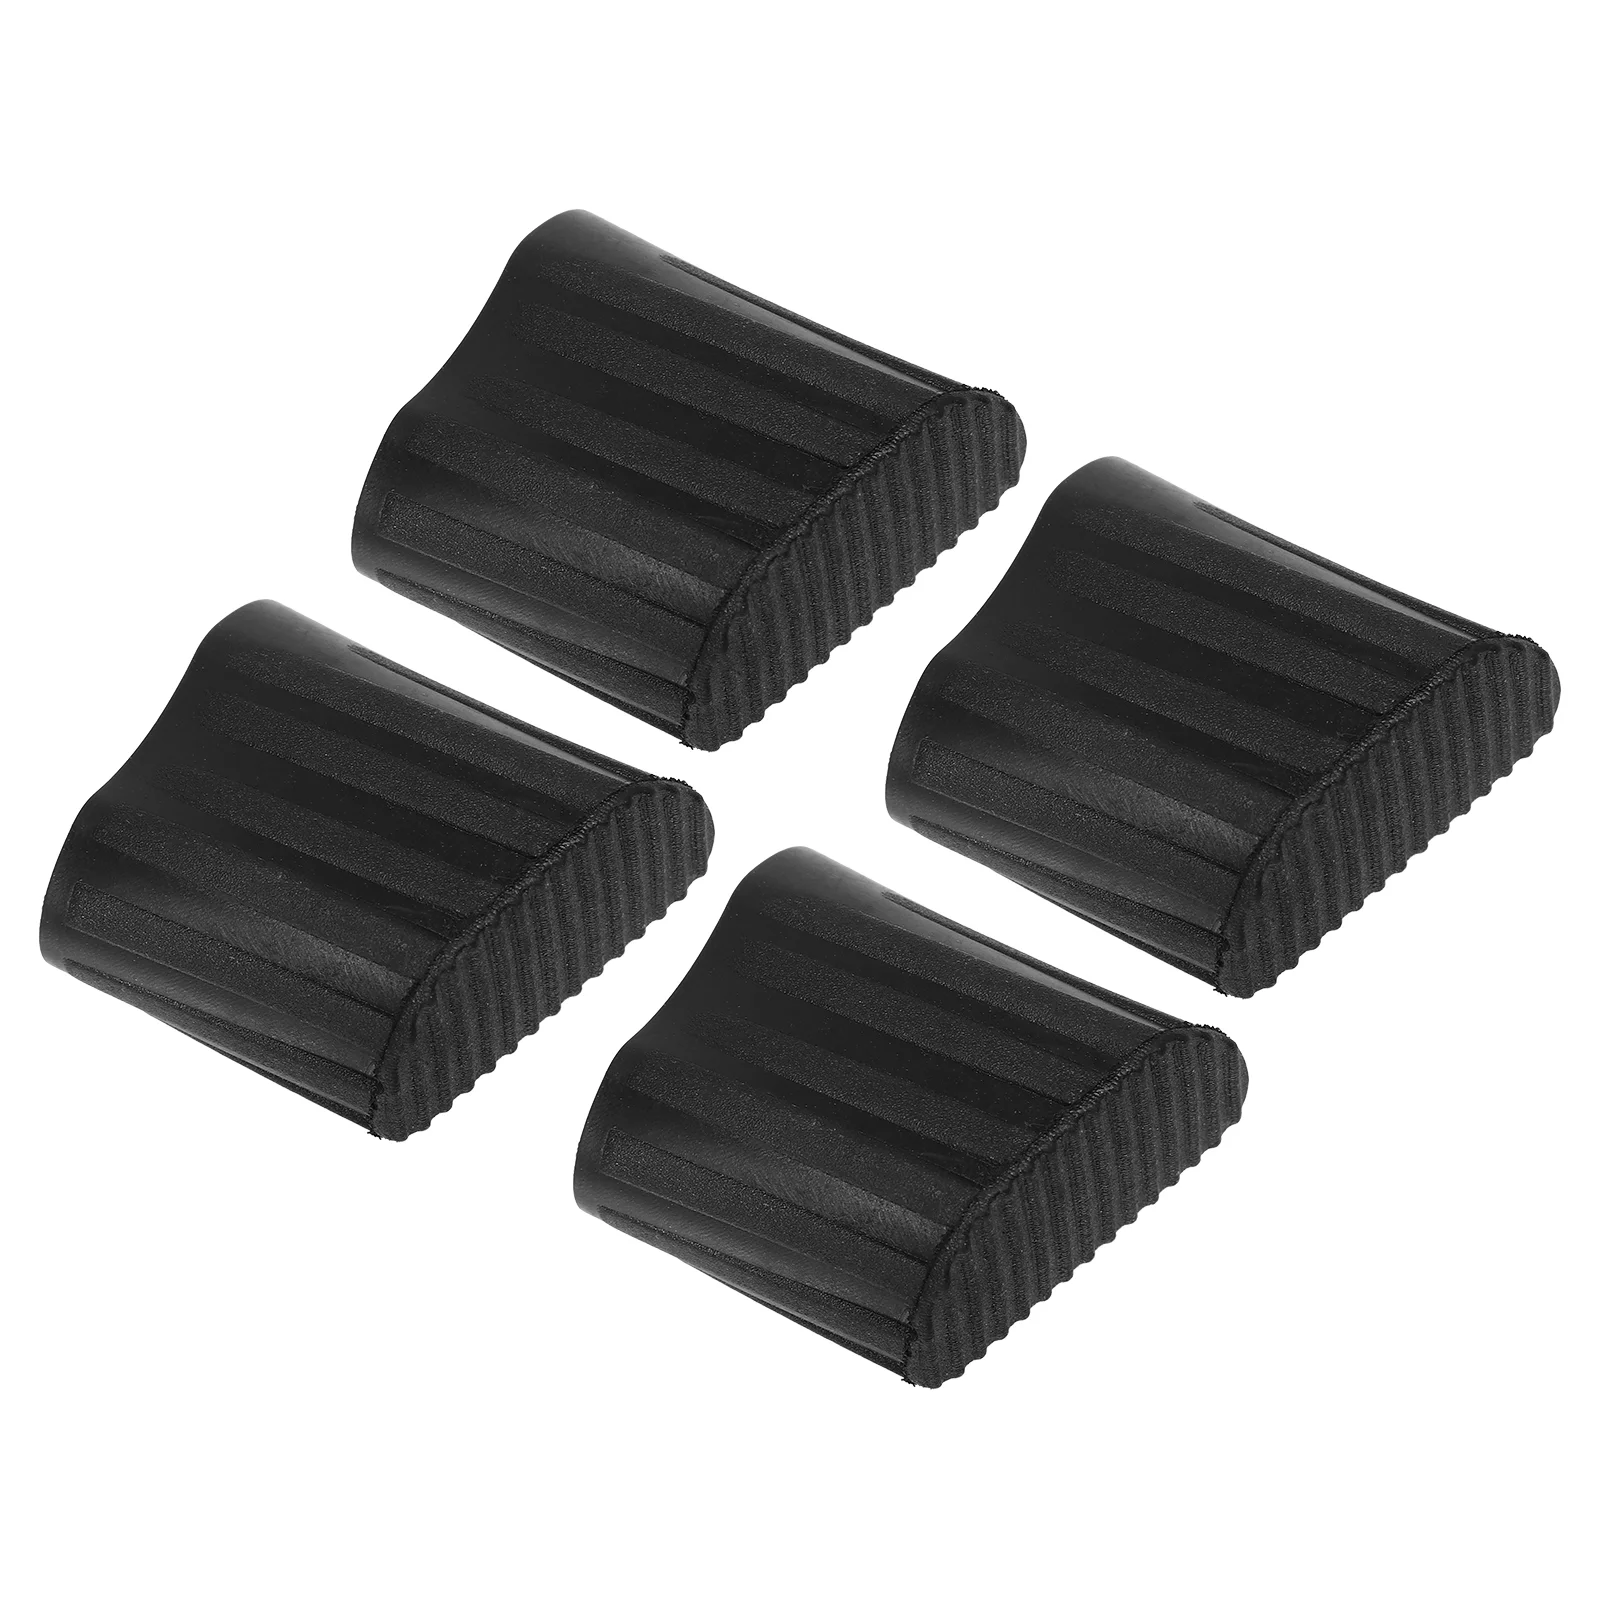 

Ladder Feet Rubber Covers Pads Stepreplacement Extension Foot Non Mat Leg Caps Cover Parts Protector Furniturepad Accessories